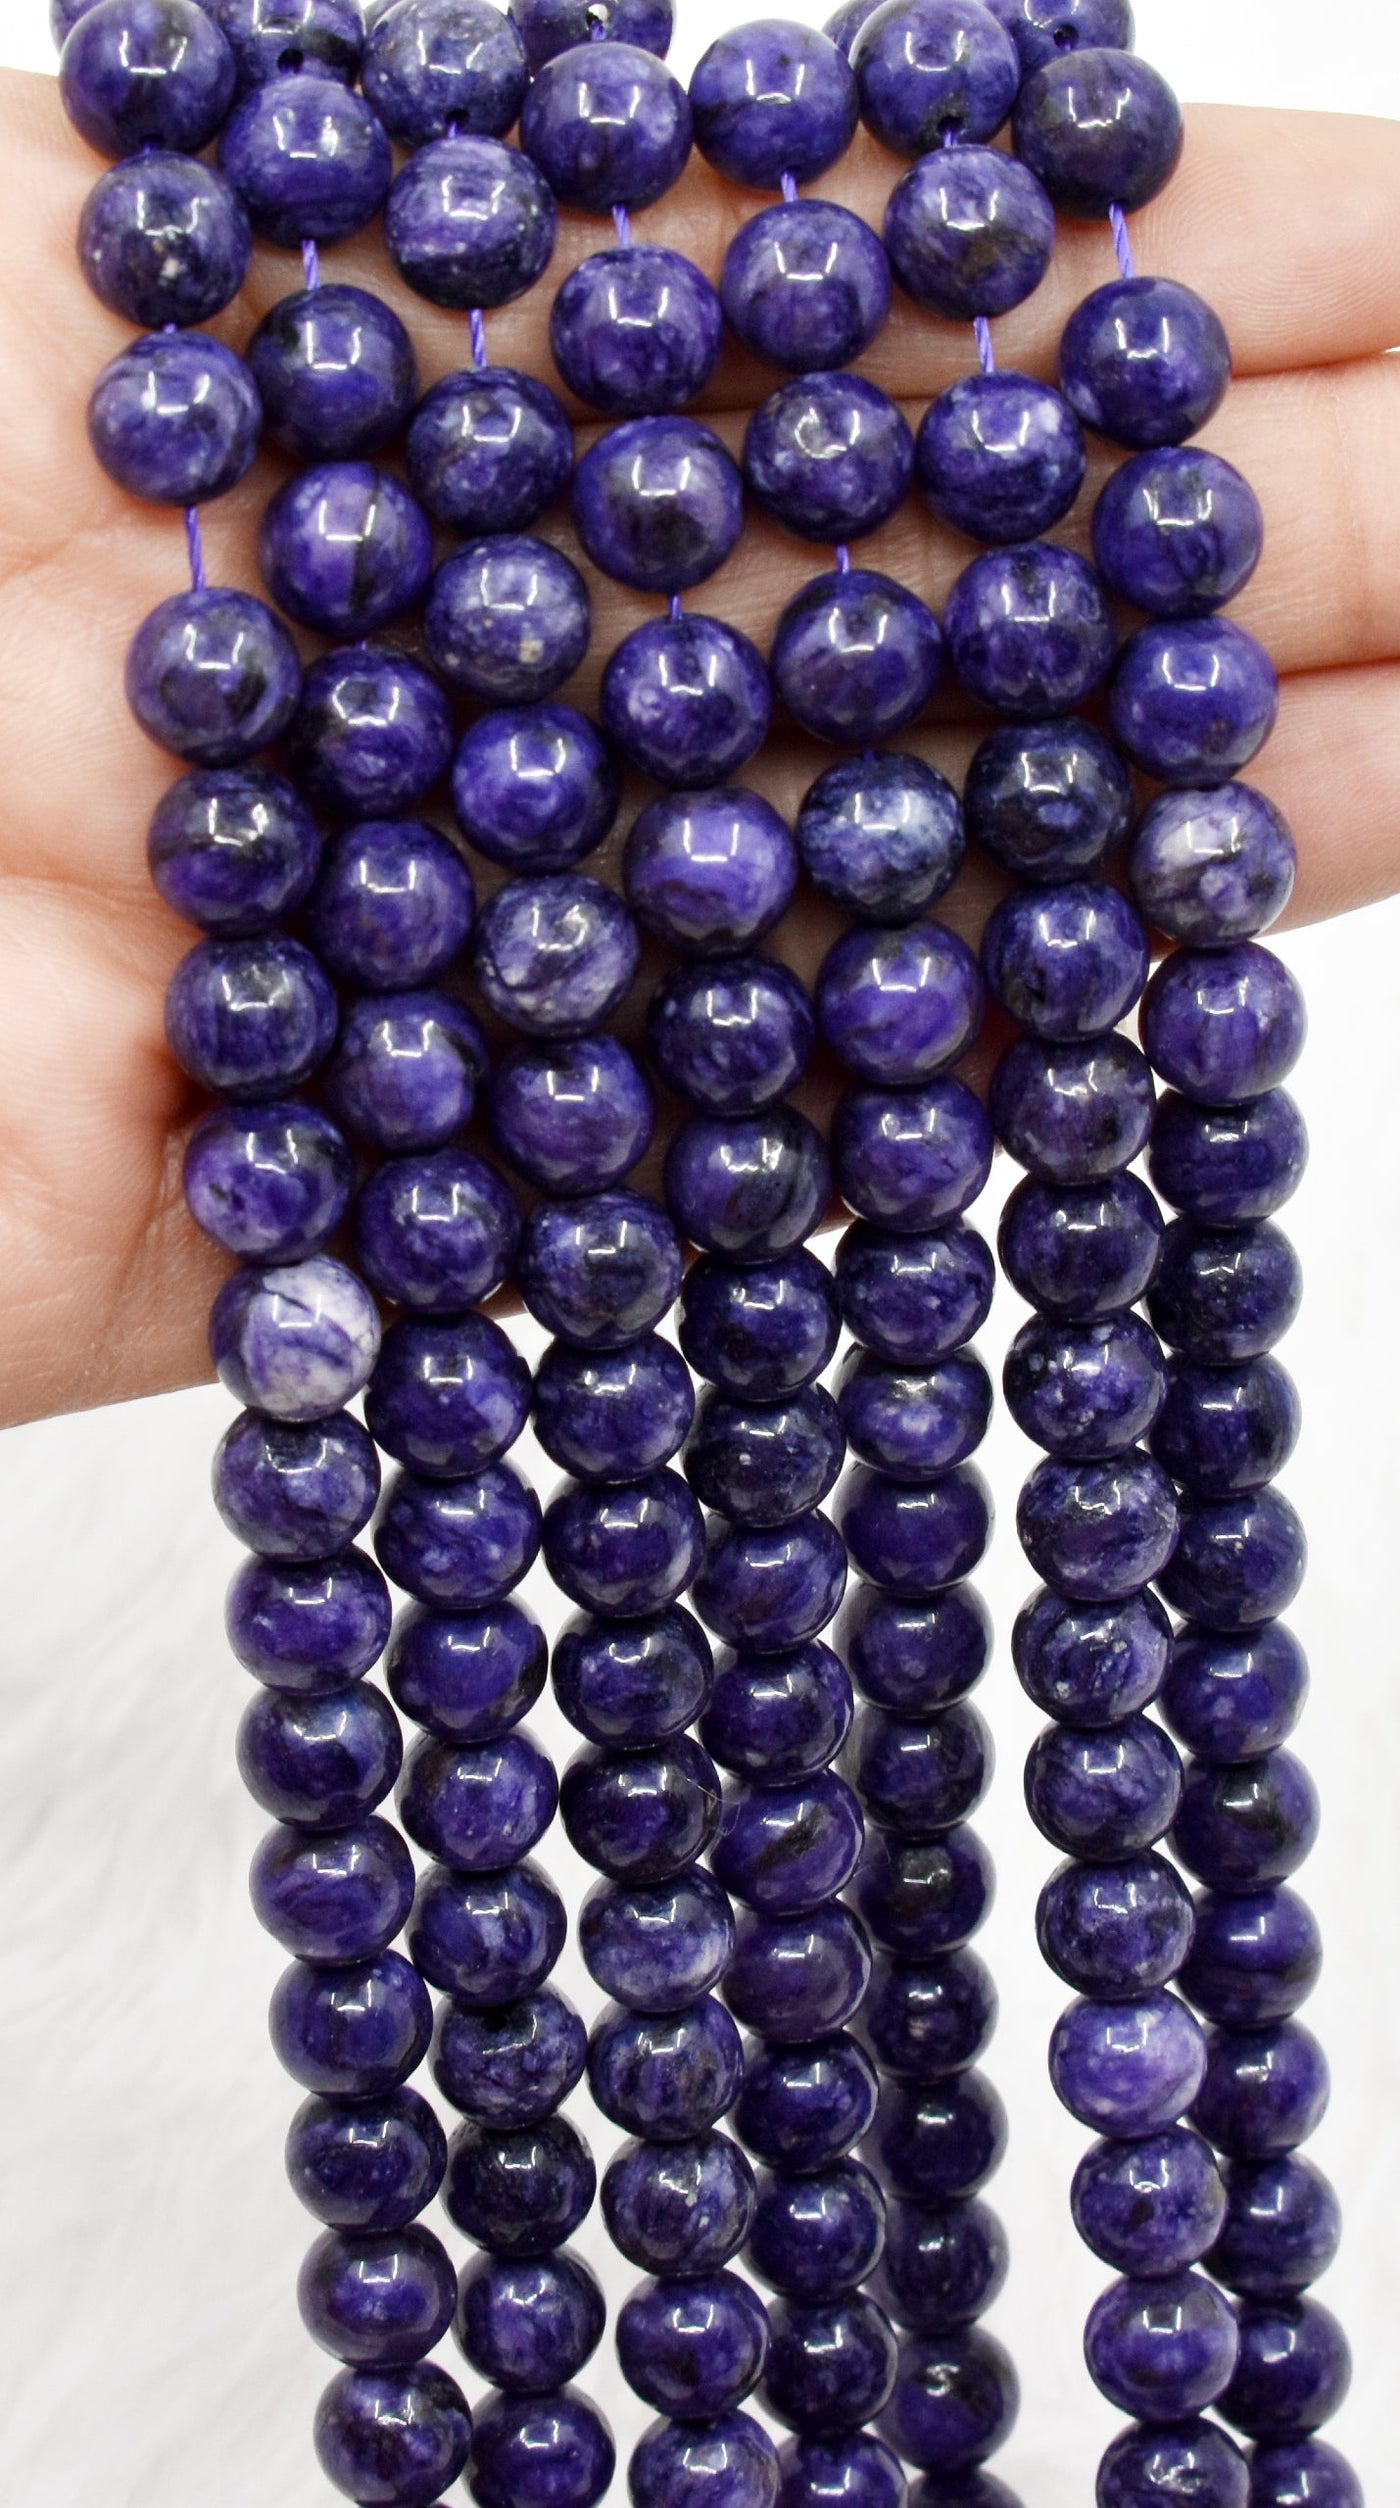 Chariote Dyed Beads, Natural Round Crystal Beads 6mm to 10mm